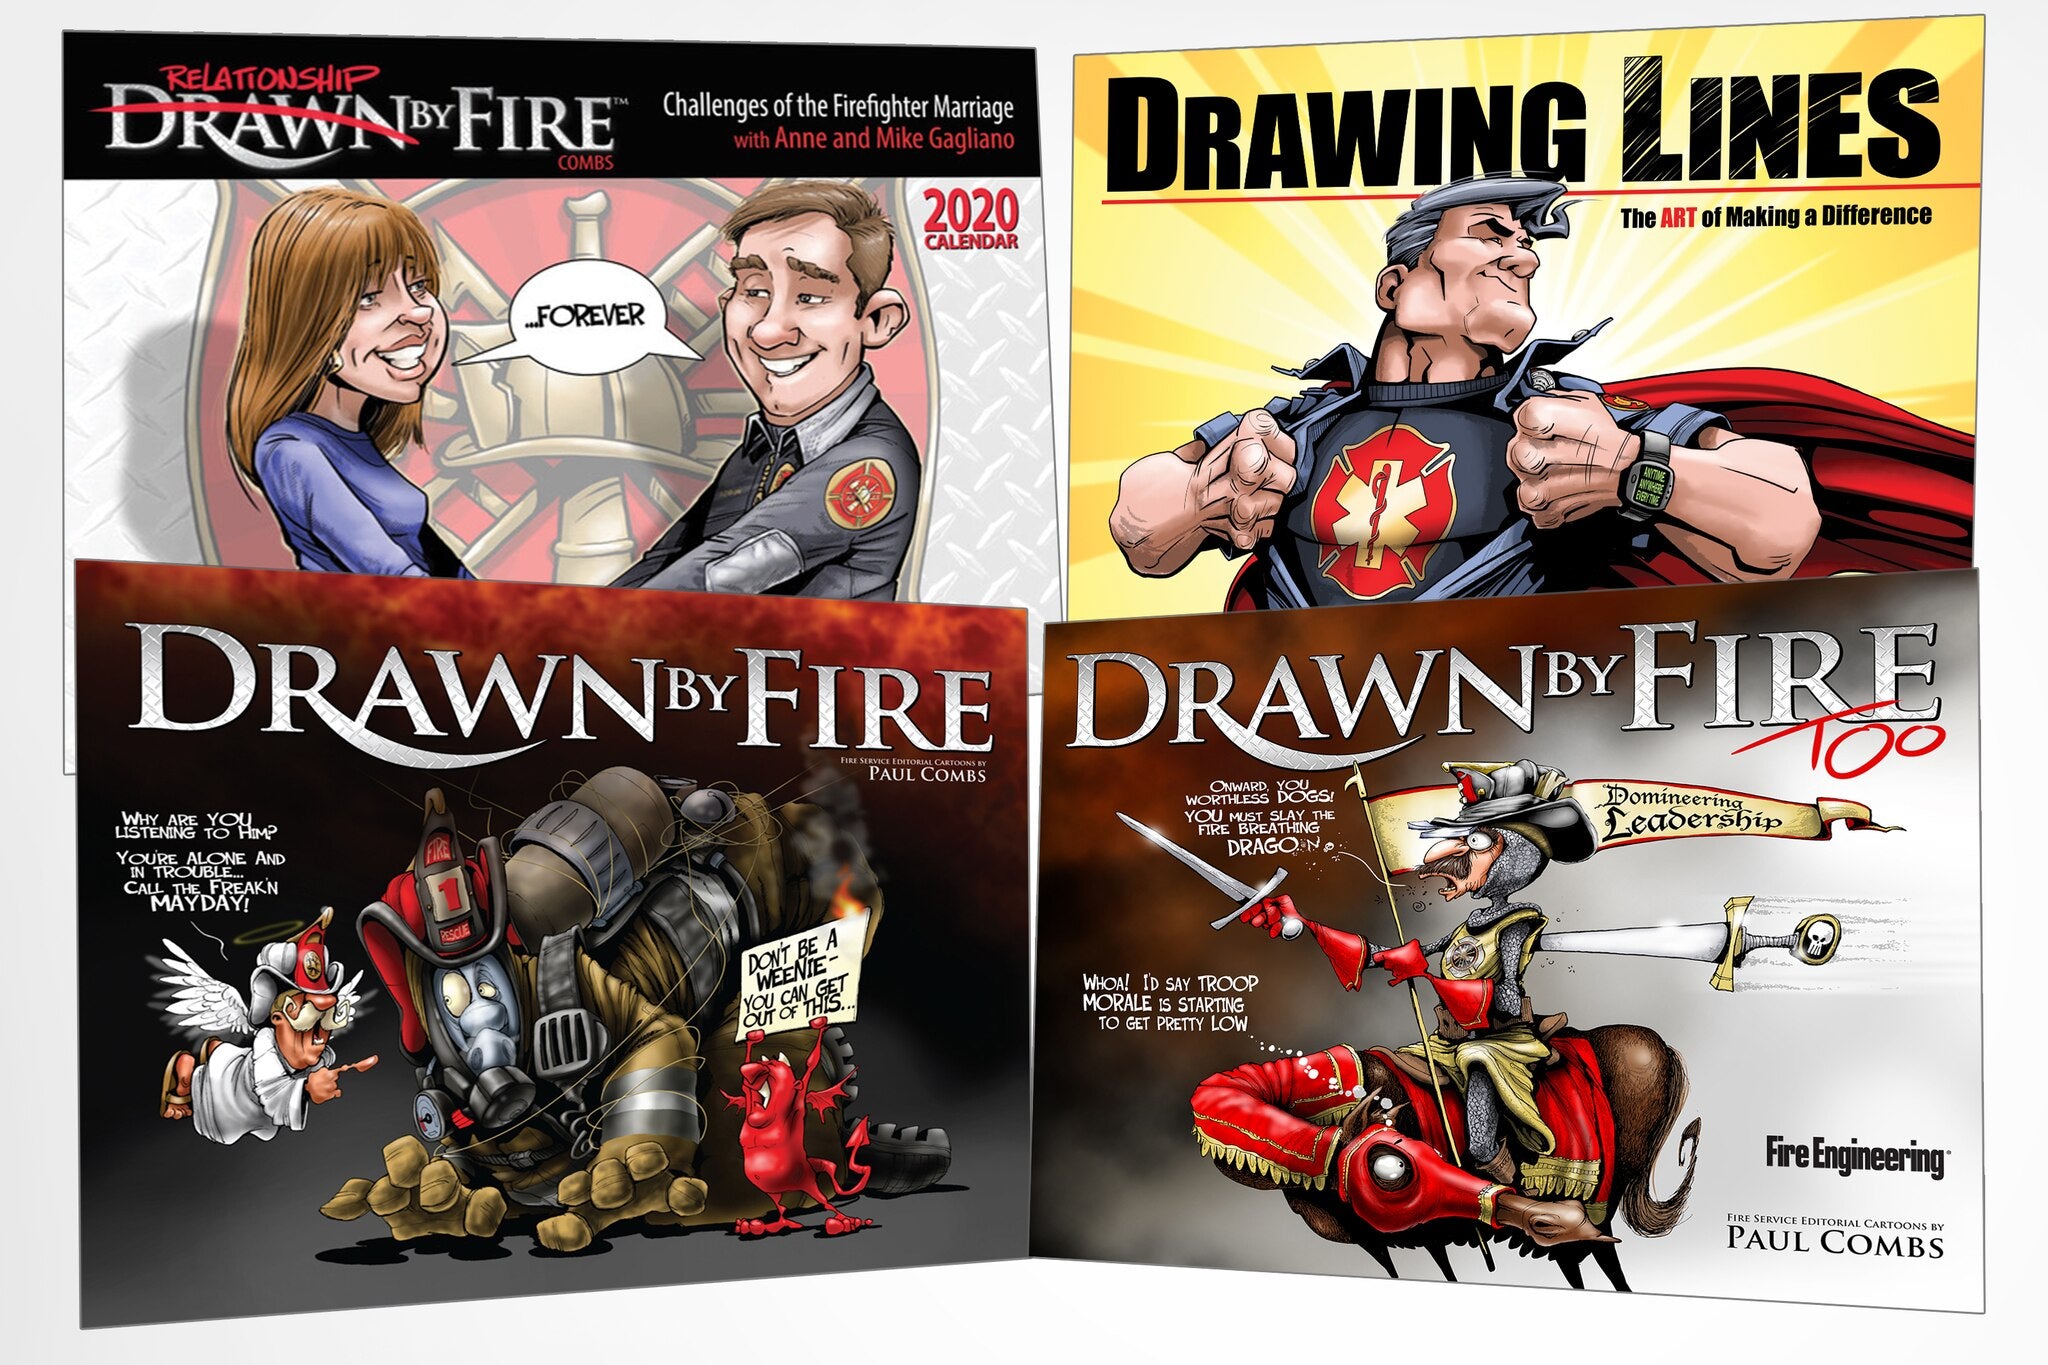 Fire Engineering Books: Drawn by Fire Bundle